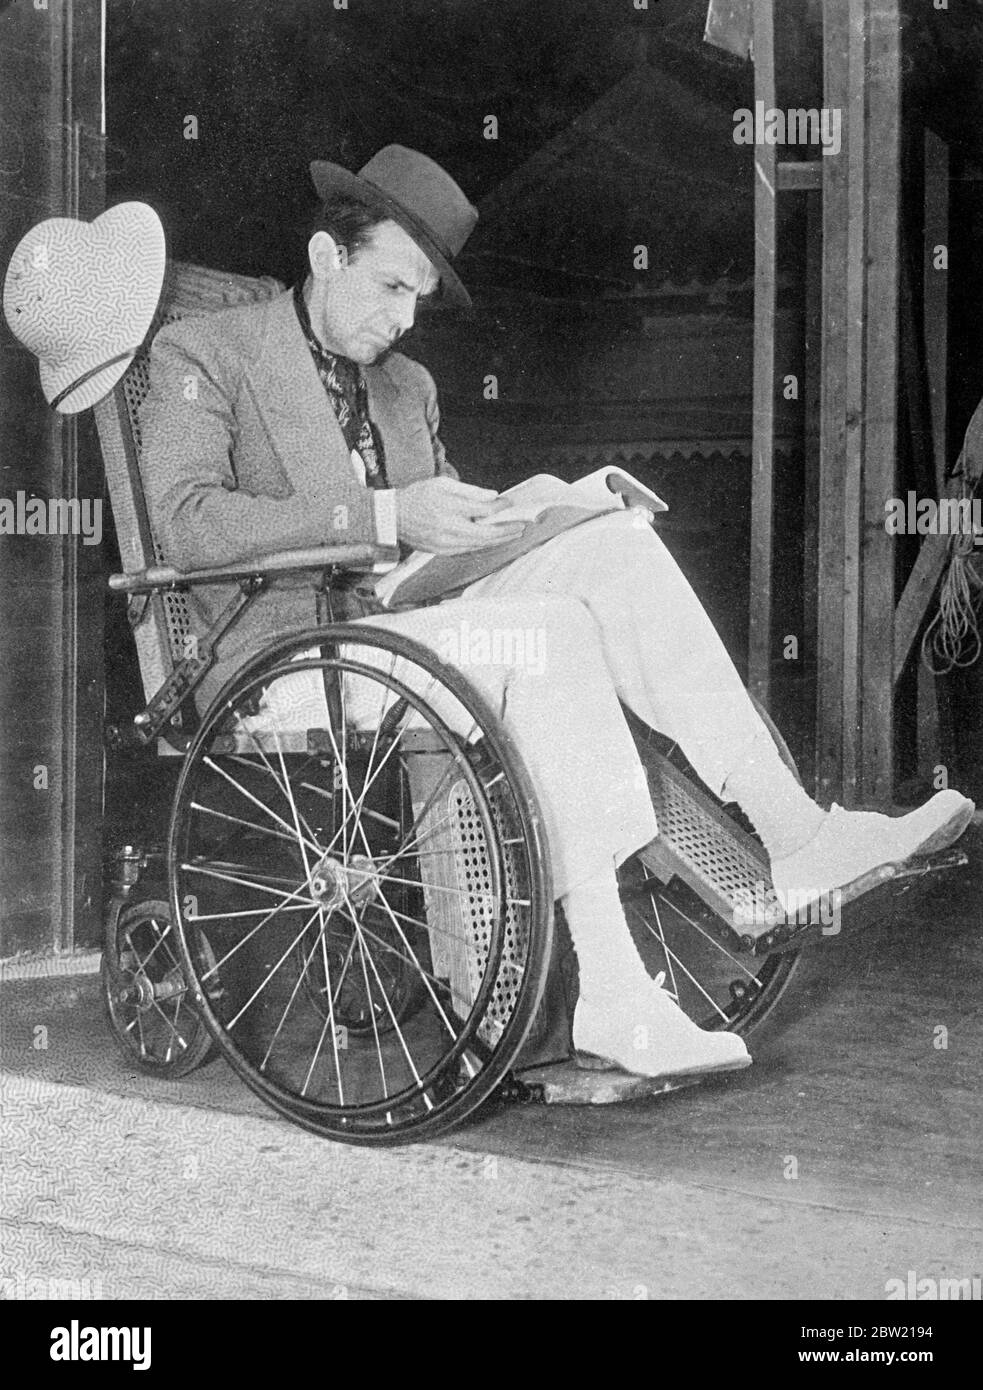 Raymond Massey, the British actor is recovering from the effects of phlebitis (blood clot in the leg) in Hollywood. In order to waste as little time as possible, Mr Massey is moving about the Samuel Goldwyn Studios in a wheelchair. 25 August 1937 Stock Photo